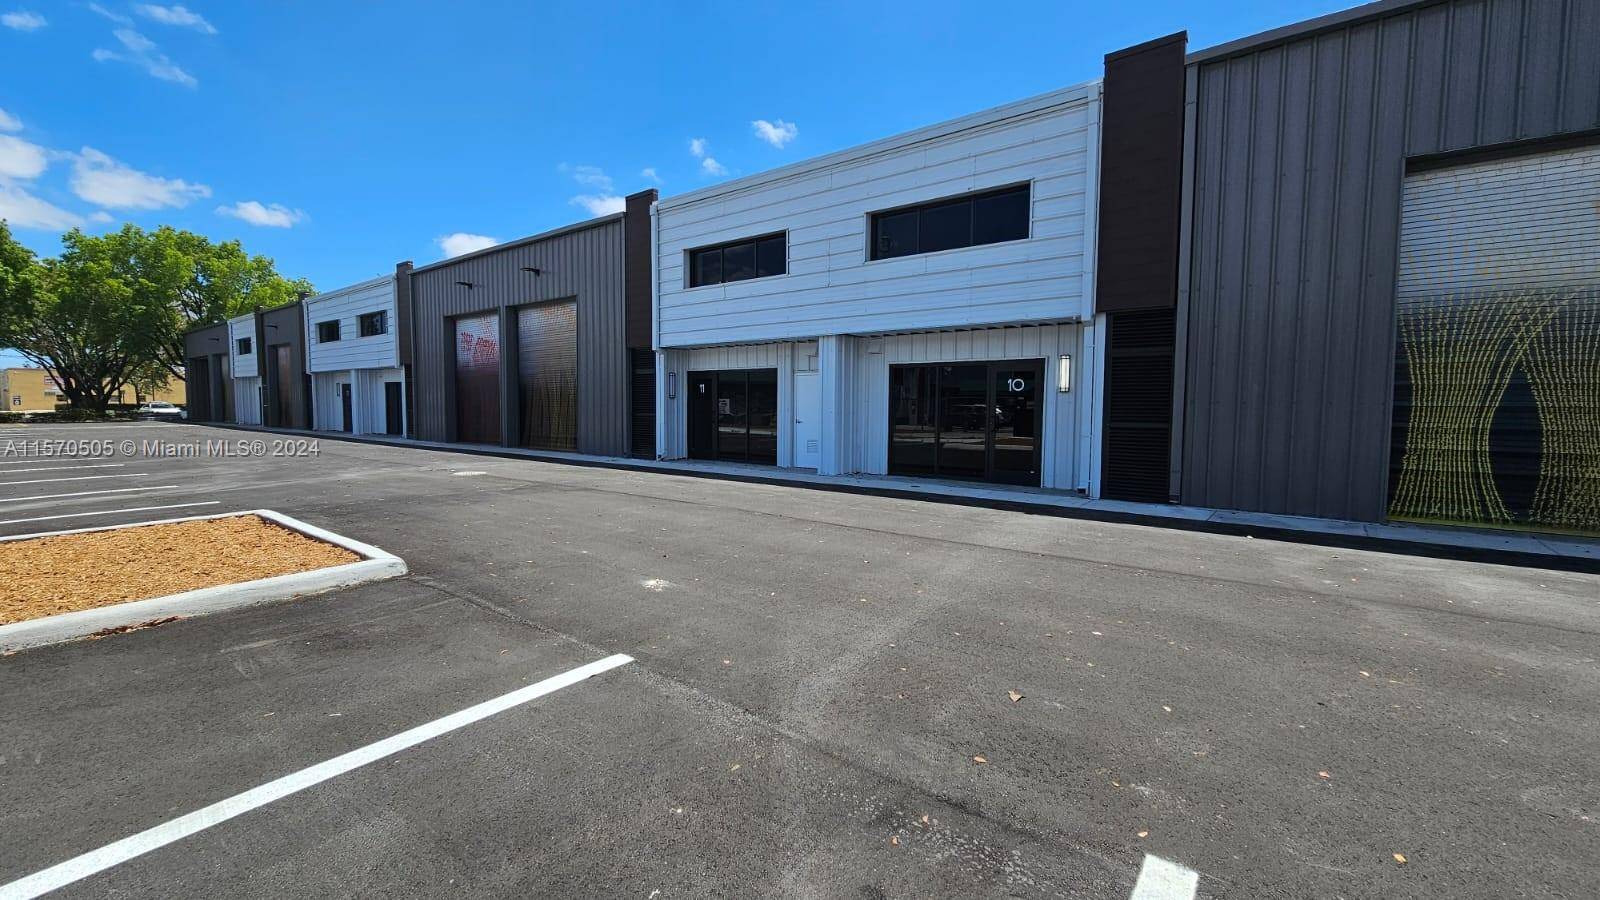 Brand new construction urban industrial 4800 sqft warehouse in Medley Florida jist minites from Miami International Airport and three minutes to the palmetto express way ramp.